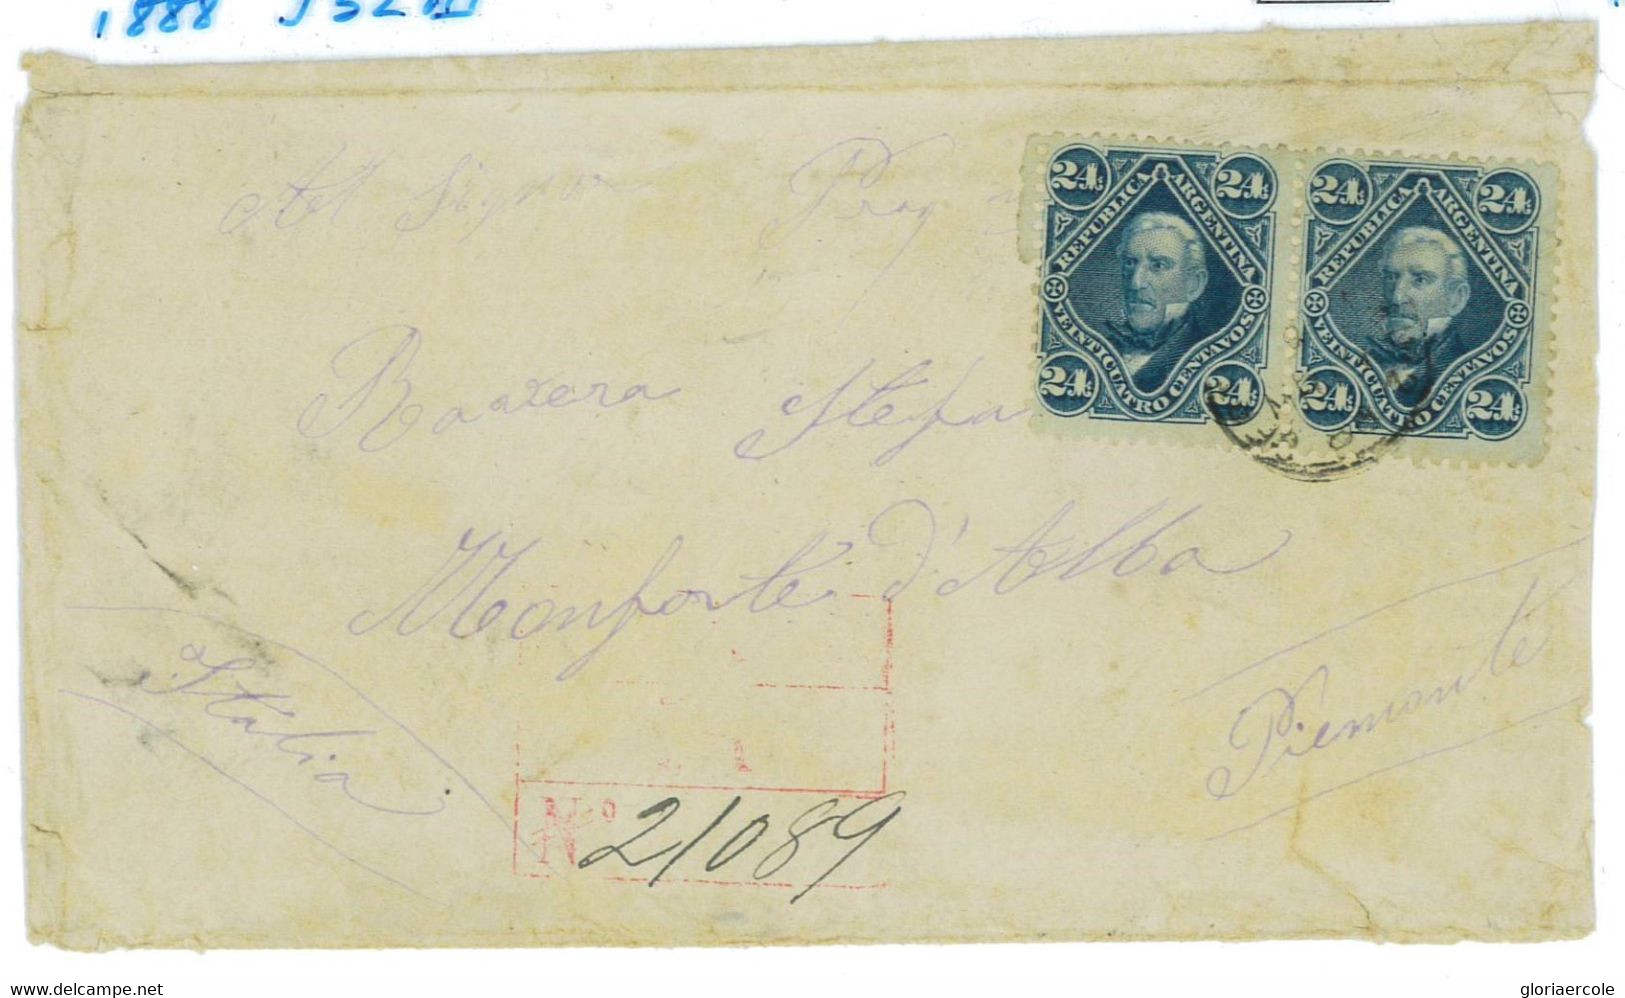 P0253 - ARGENTINA - POSTAL HISTORY - Jalil # 52 Pair - REGISTERED COVER  To ITALY  1888 - Brieven En Documenten